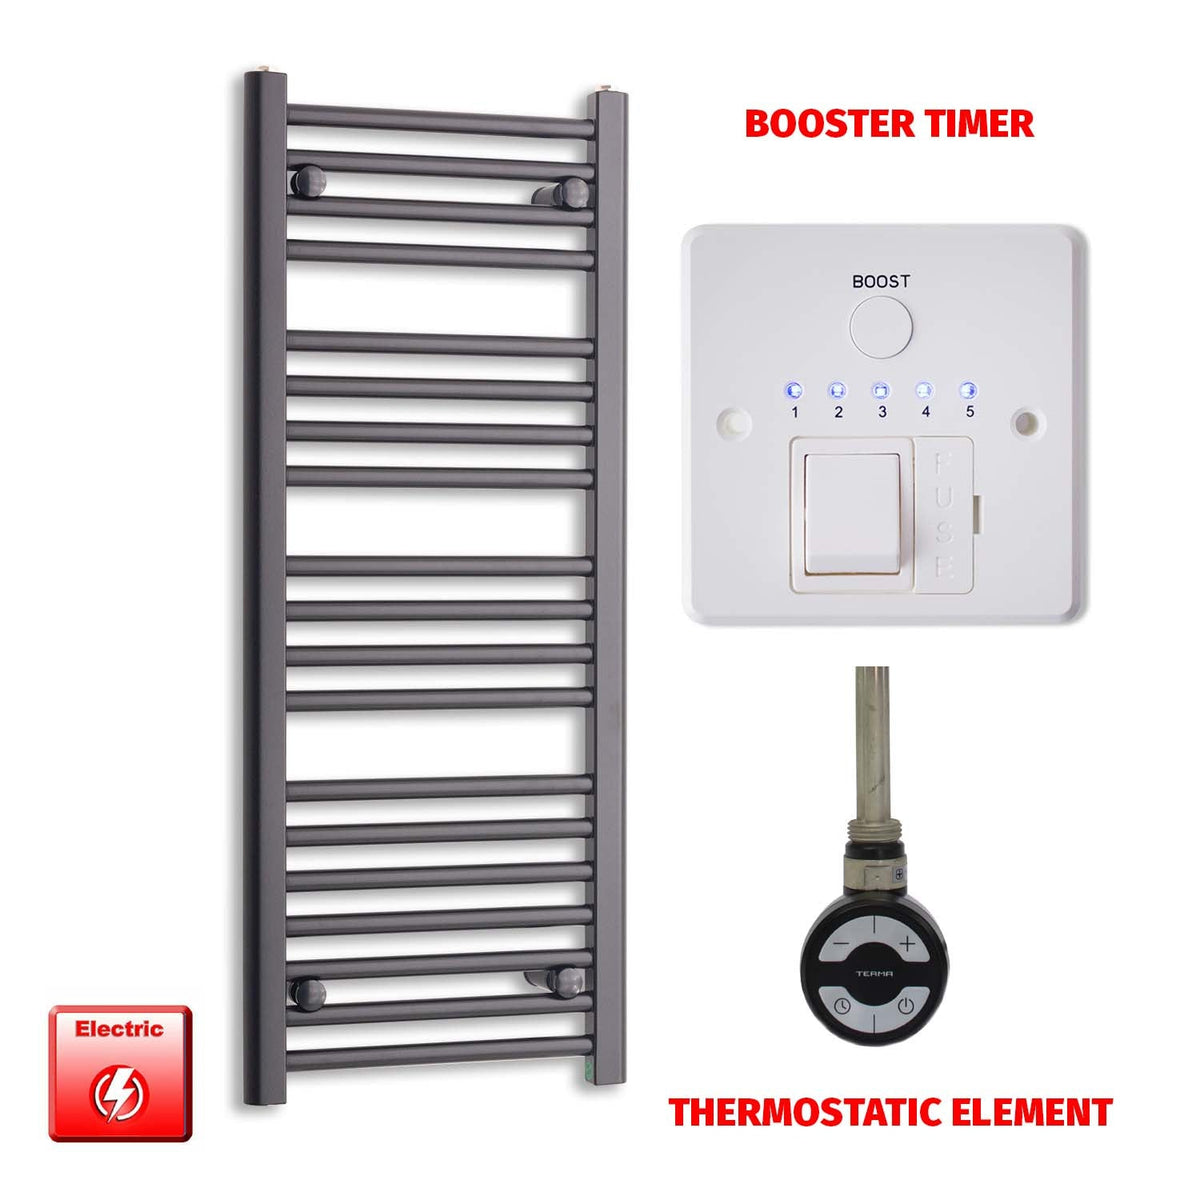 1000mm High 450mm Wide High Flat Black Pre-Filled Electric Heated Towel Radiator HTR MOA Thermostatic Booster Timer